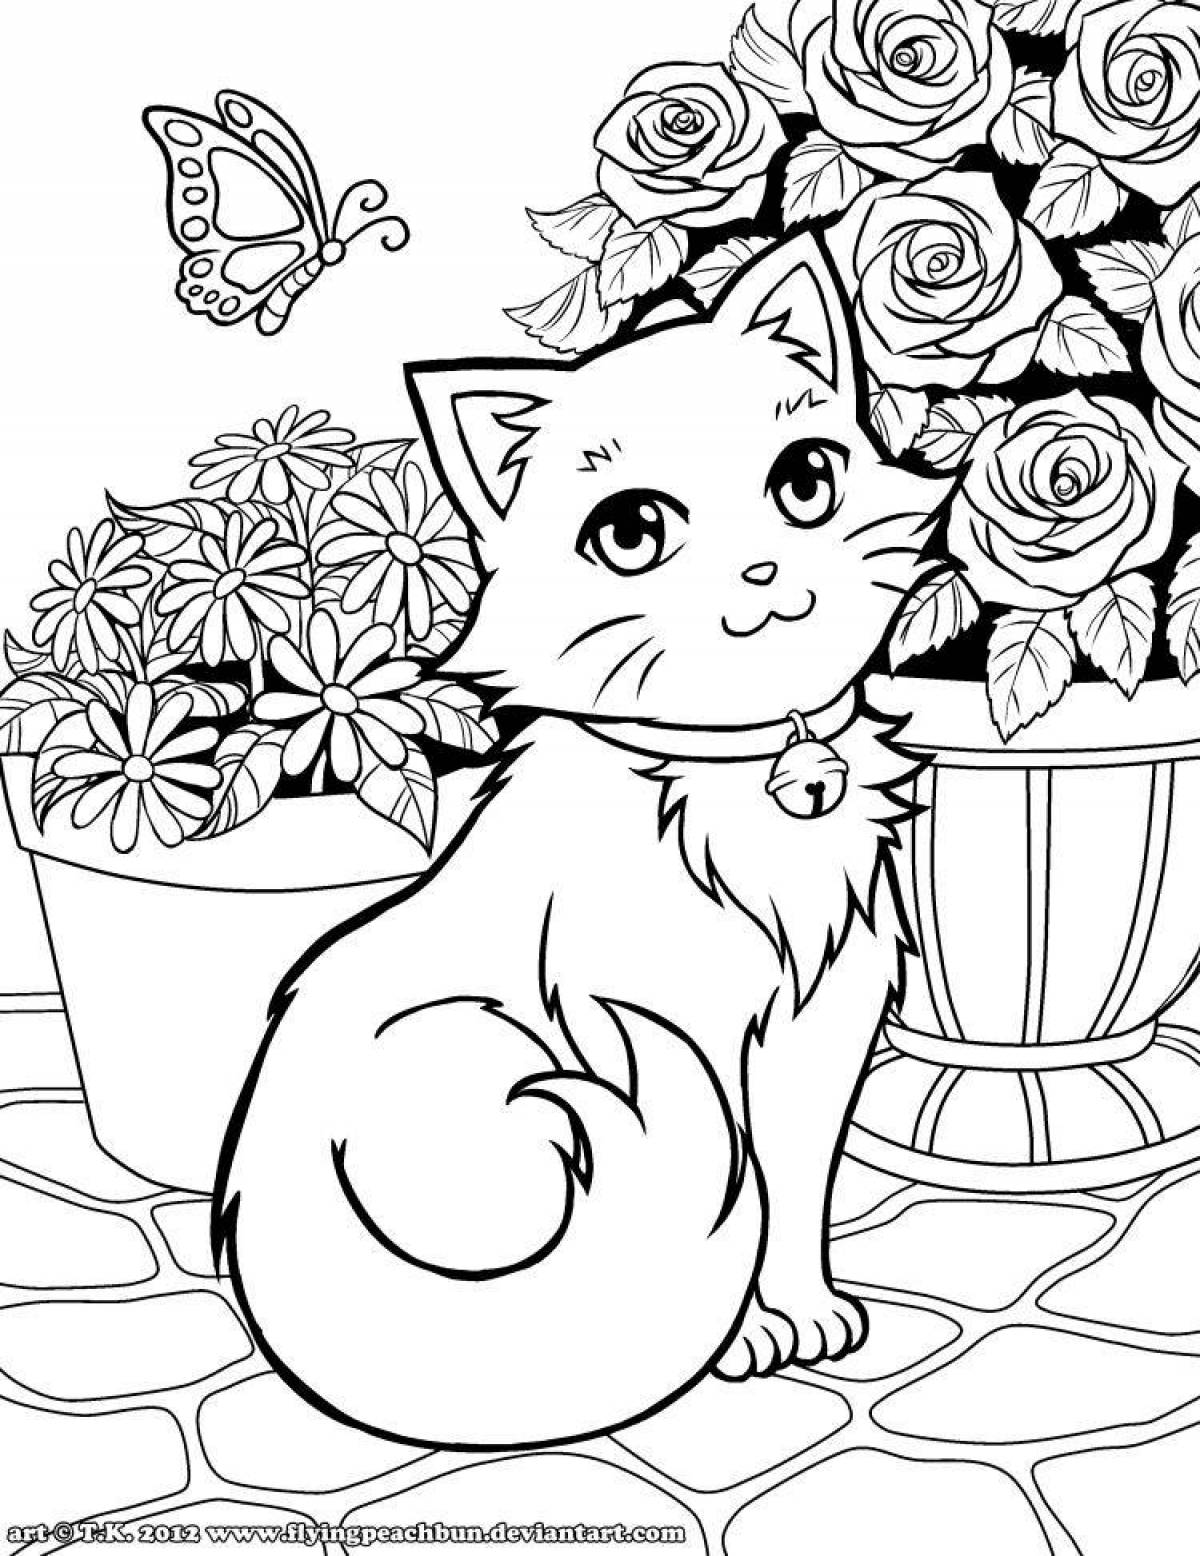 Fine cats coloring pages for girls